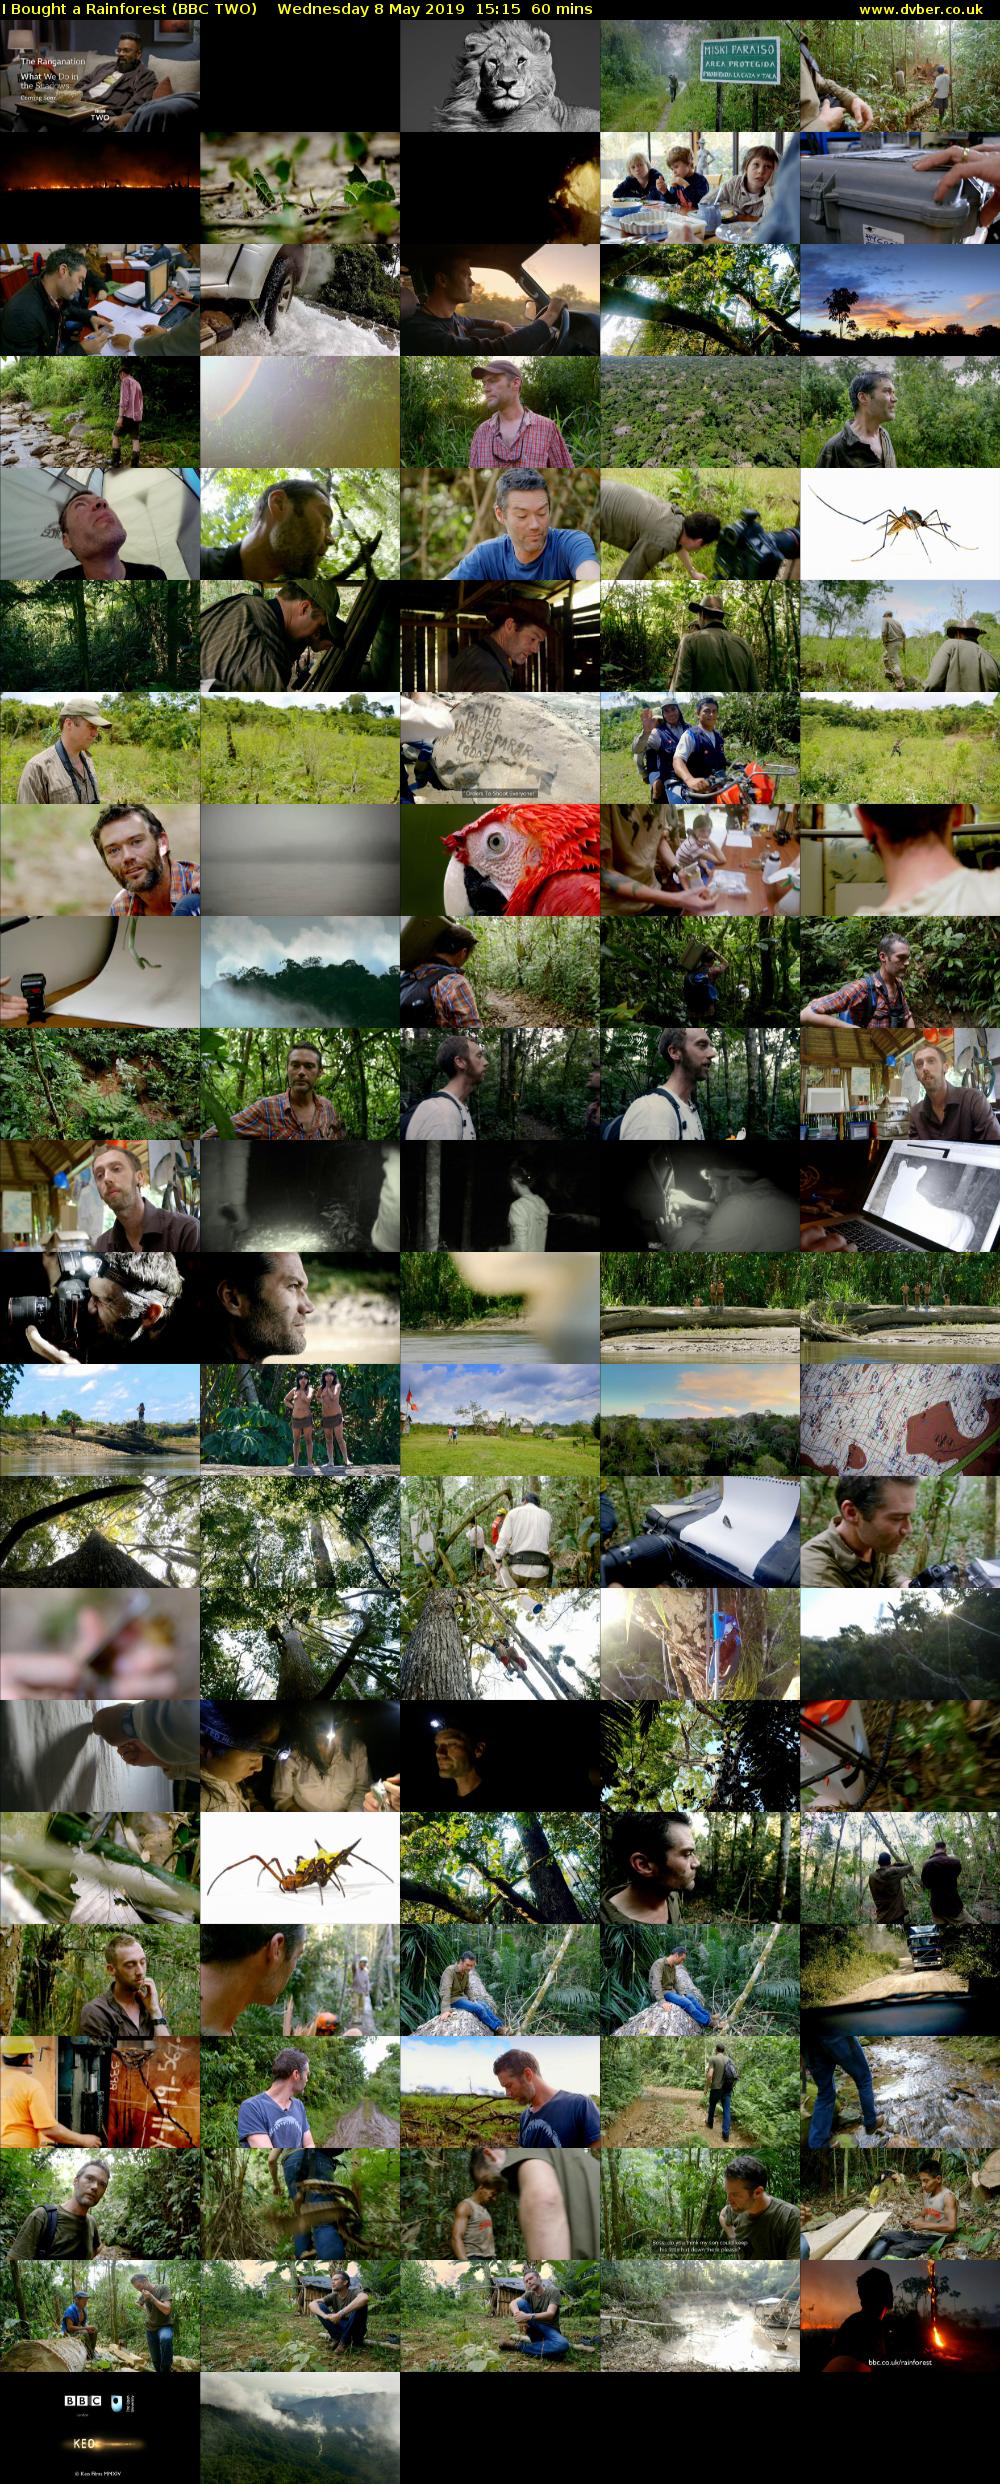 I Bought a Rainforest (BBC TWO) Wednesday 8 May 2019 15:15 - 16:15